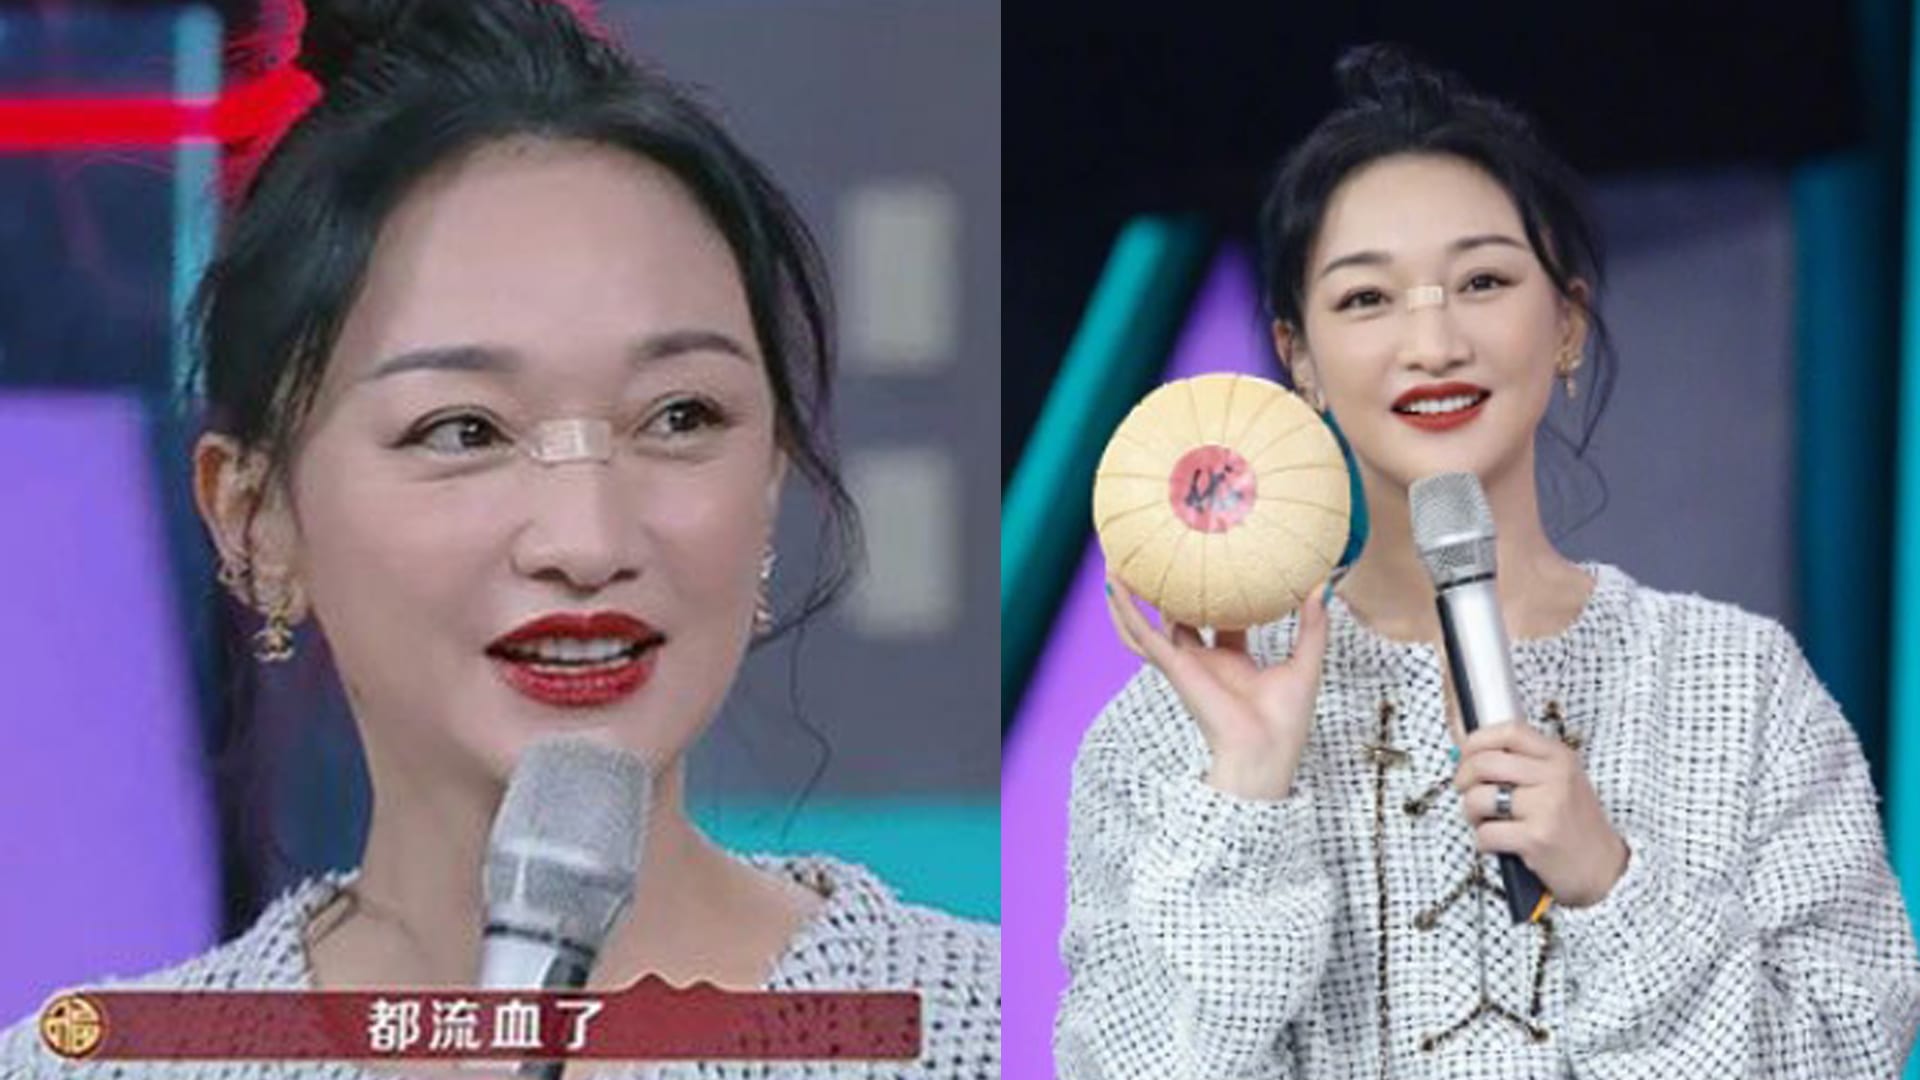 Zhou Xun Has A Cut On Her Nose Bridge ’Cos She Dropped Her Phone On Her Face While Playing With It In Bed